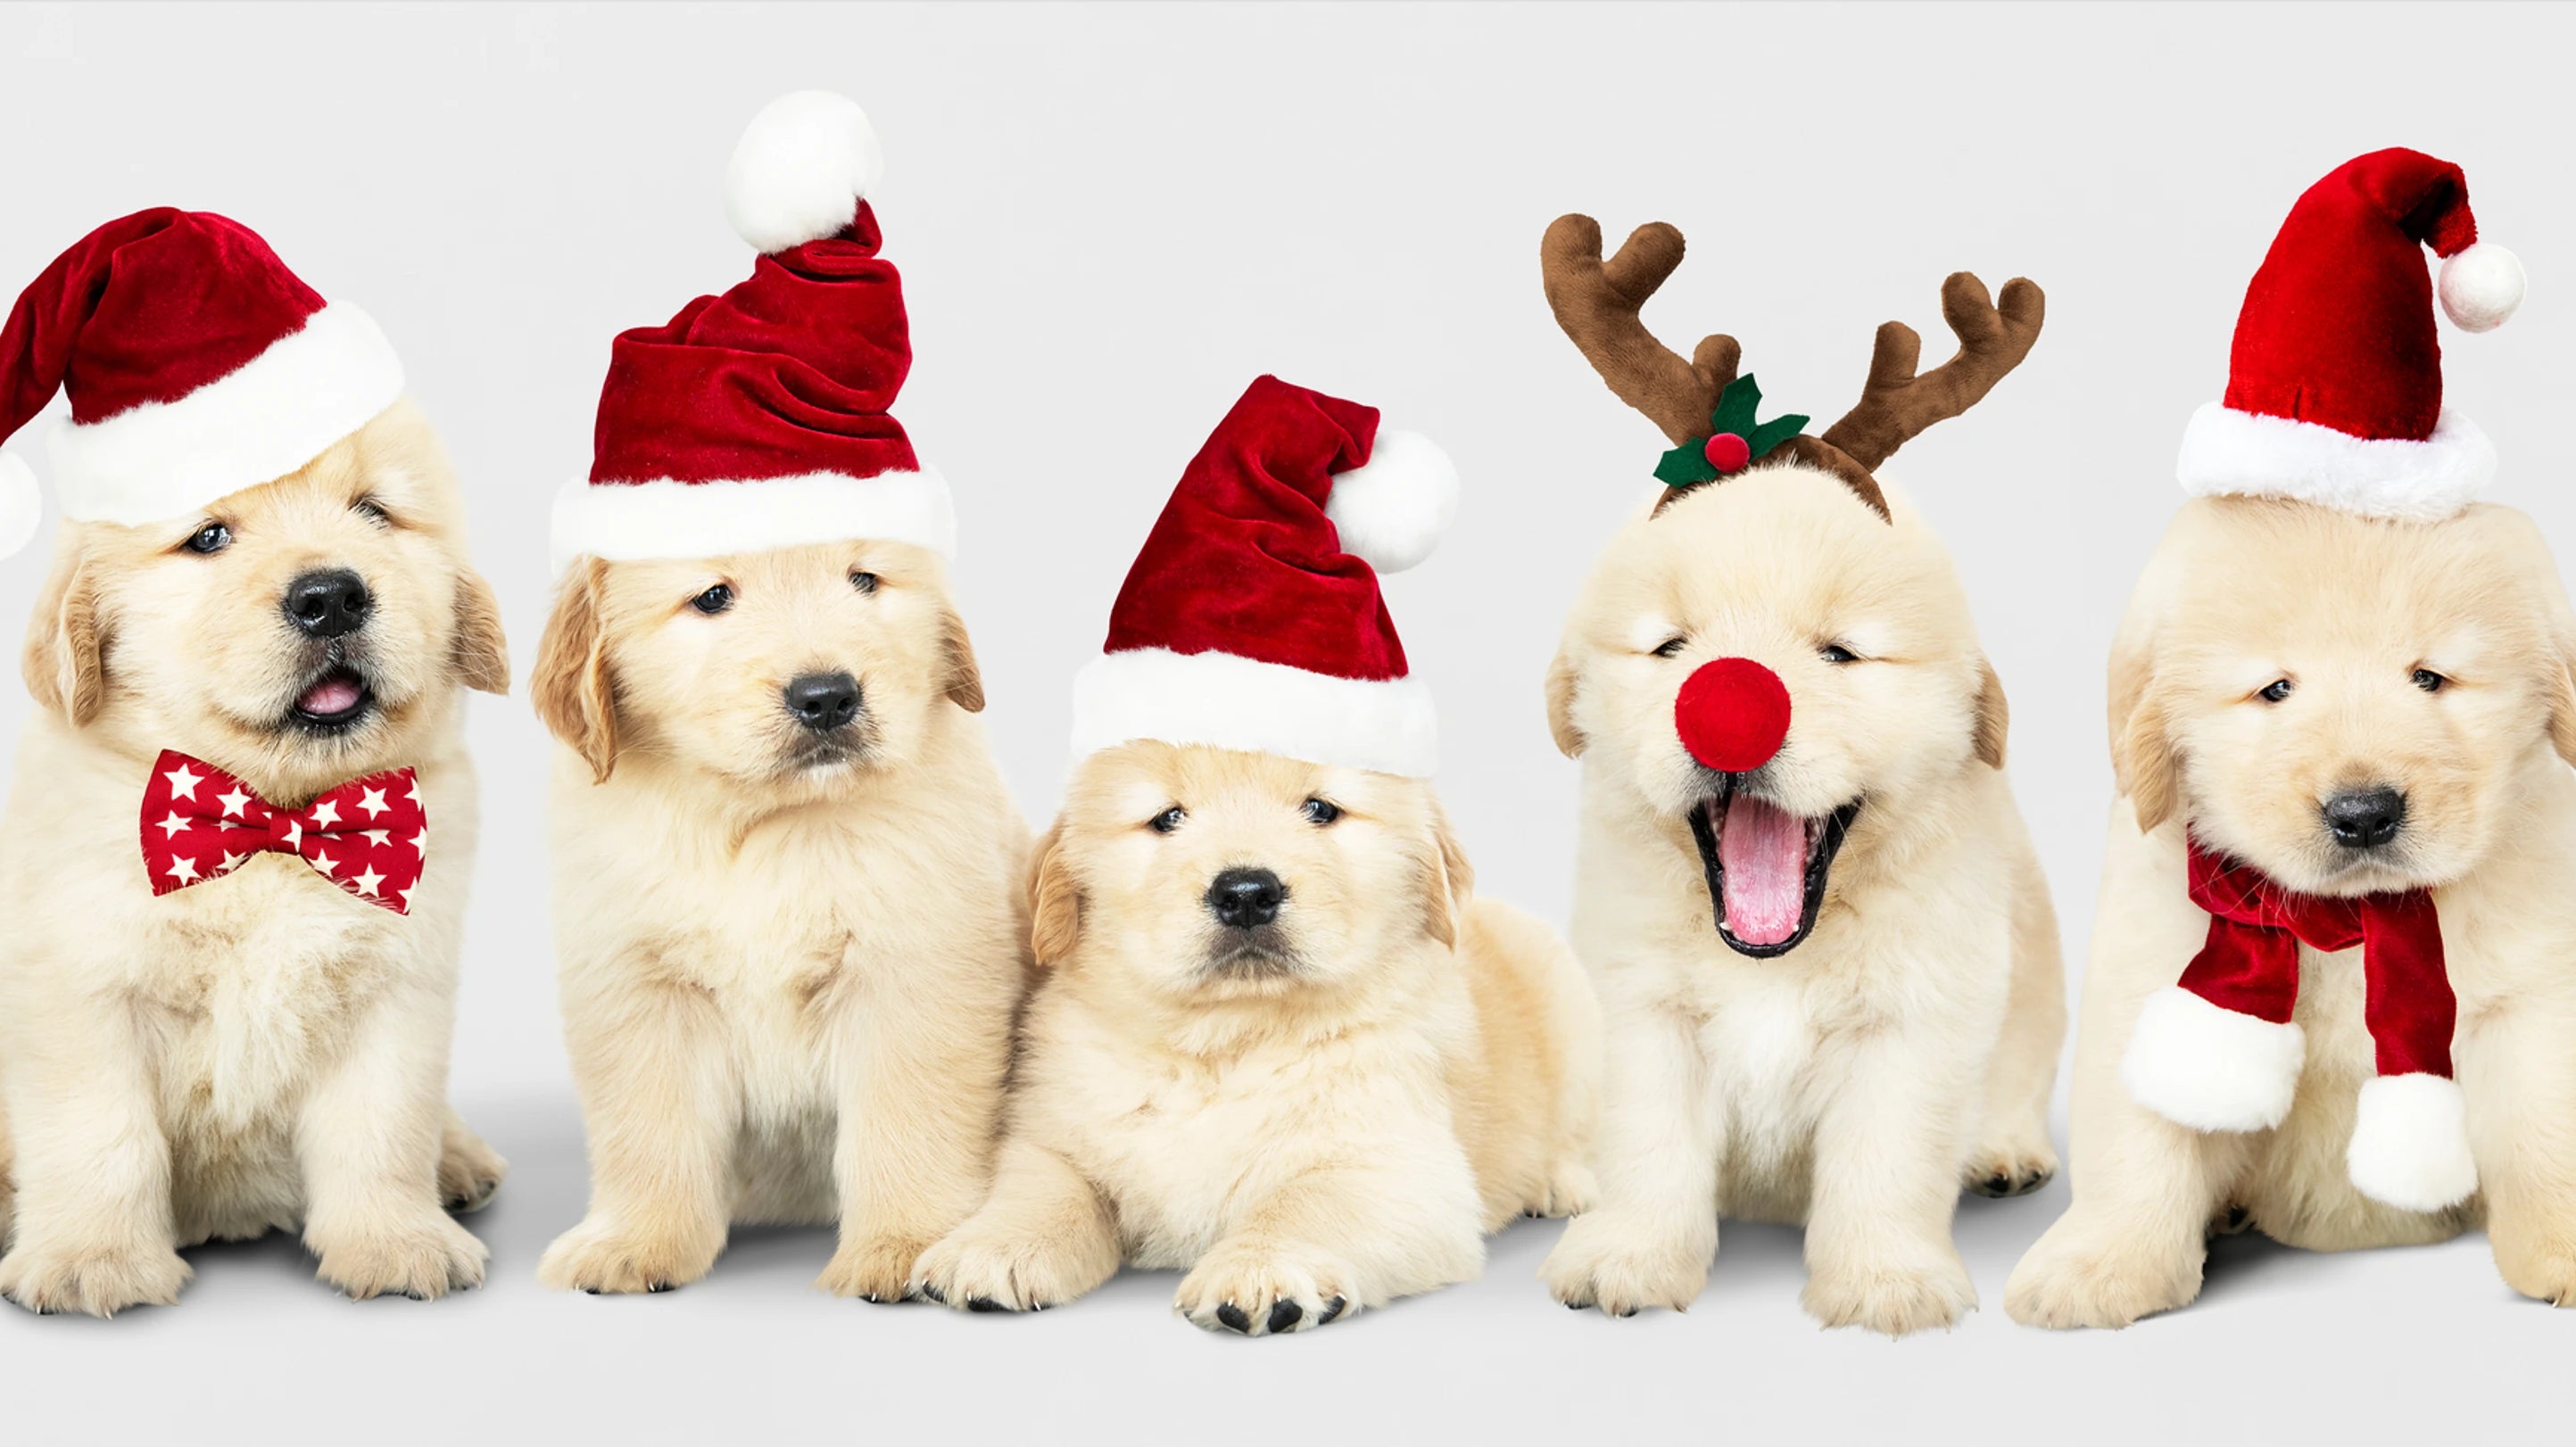 10 tips for a stress free Christmas with your puppy